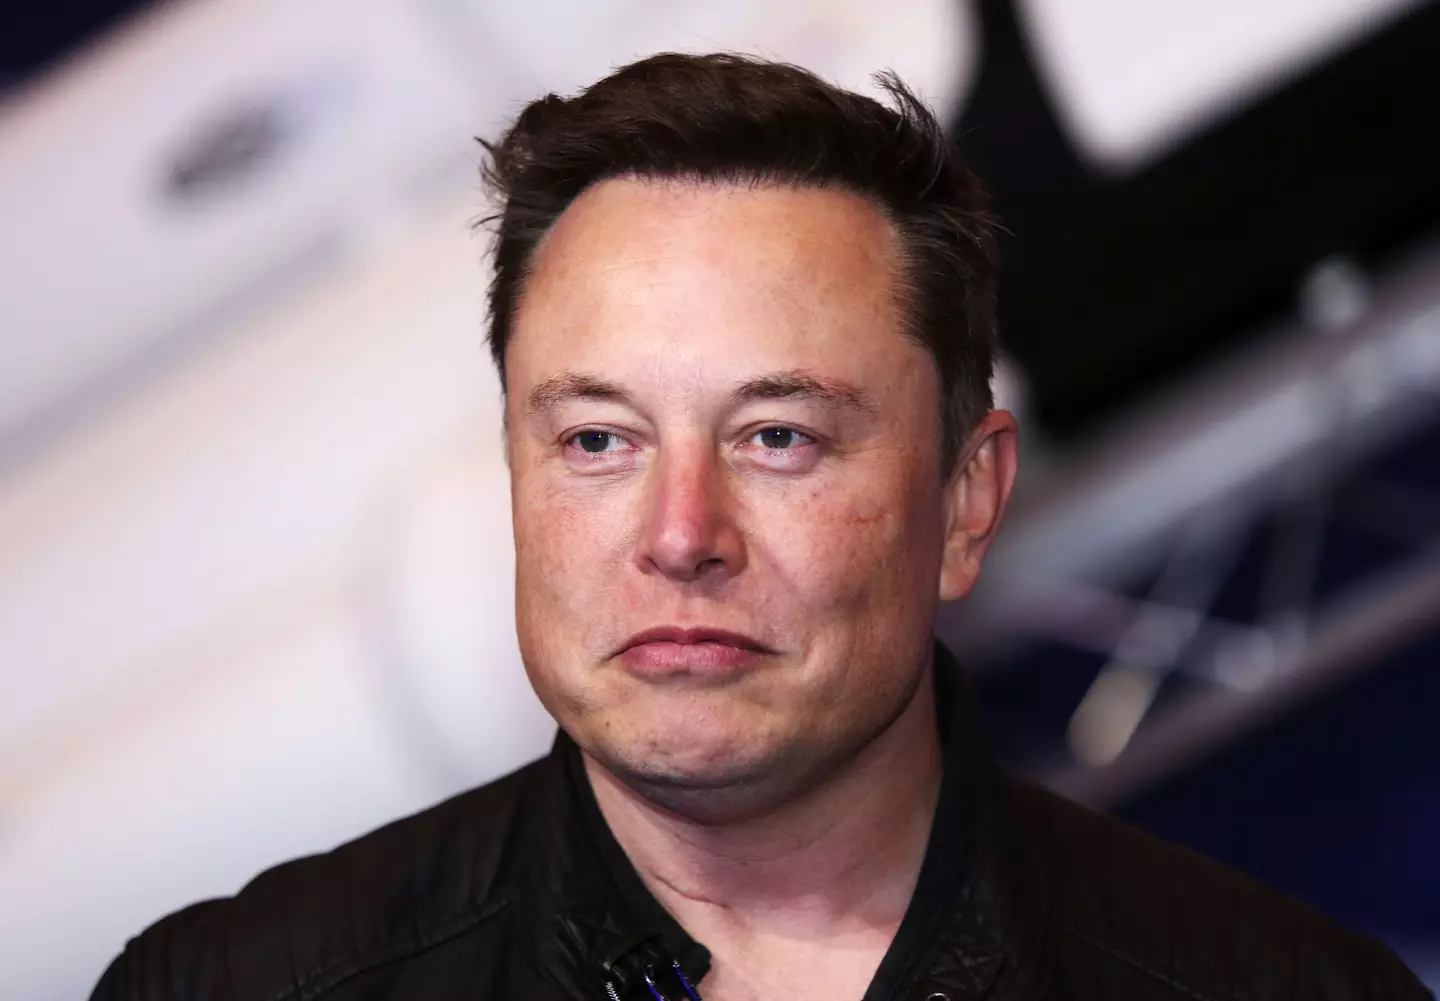 Ever wondered whether you’re brainy enough to get hired by Elon Musk?